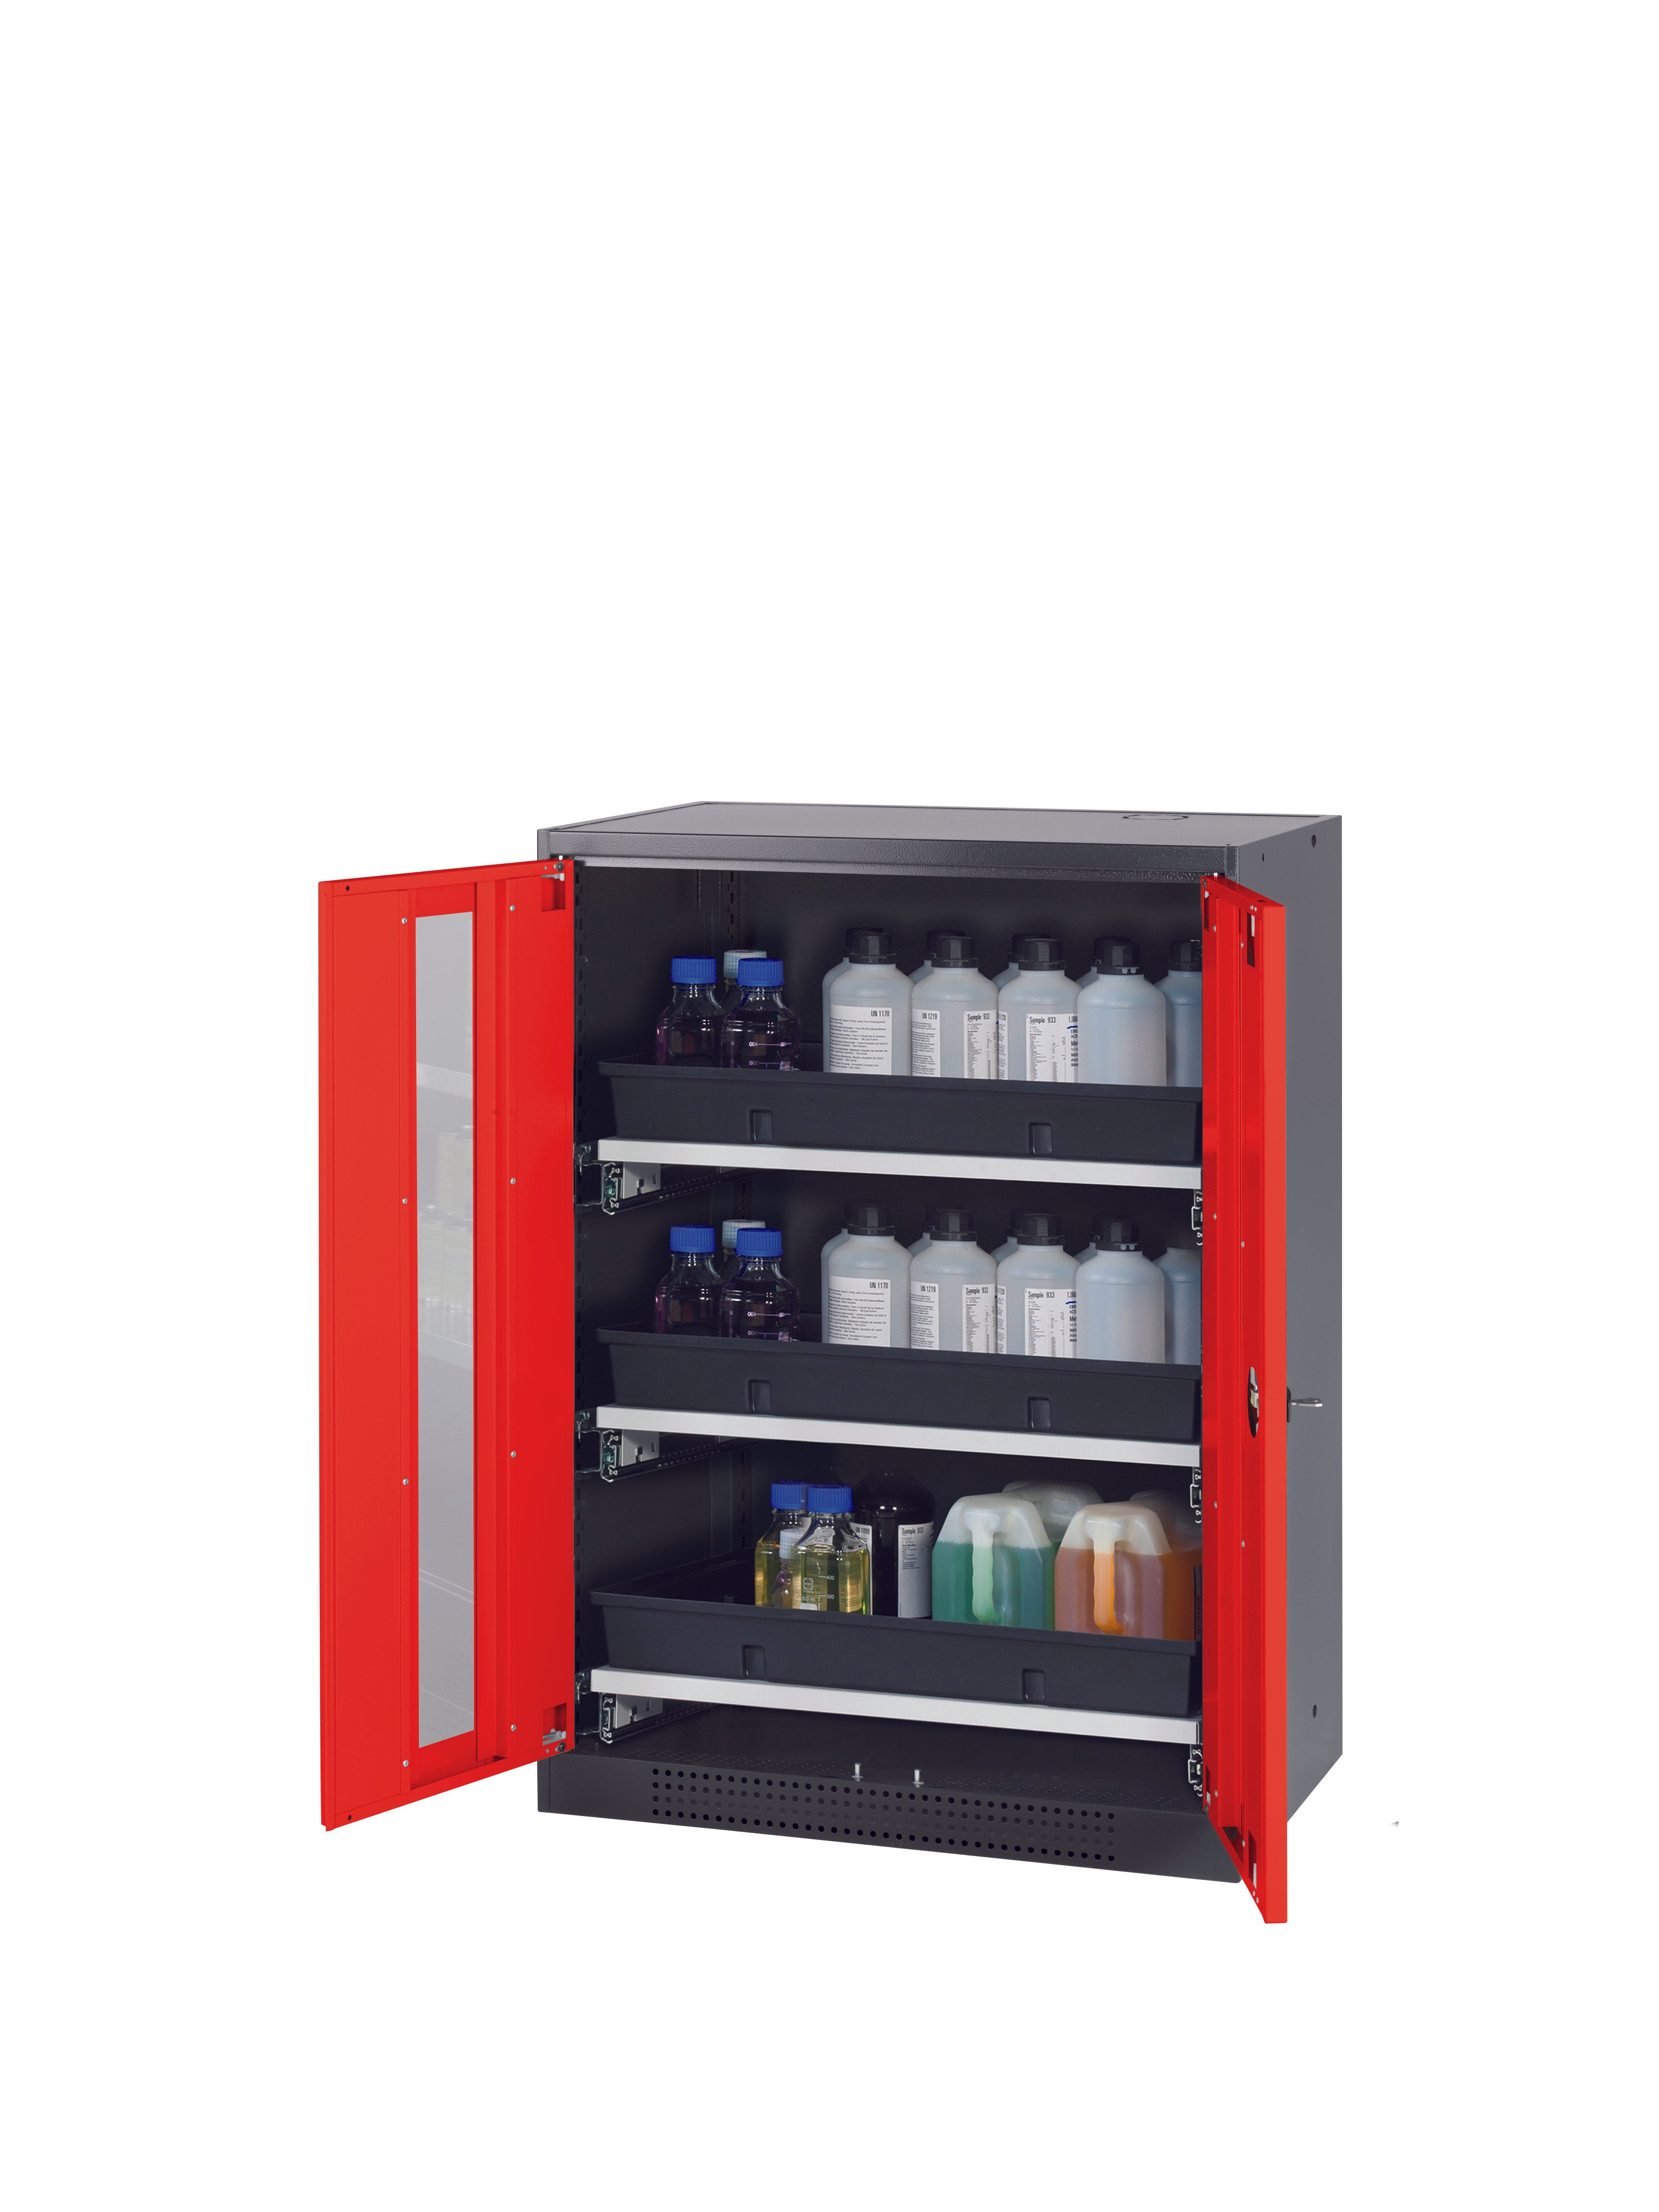 Chemical cabinet CS-CLASSIC-G model CS.110.081.WDFW in traffic red RAL 3020 with 3x AbZ pull-out shelves (sheet steel/polypropylene)